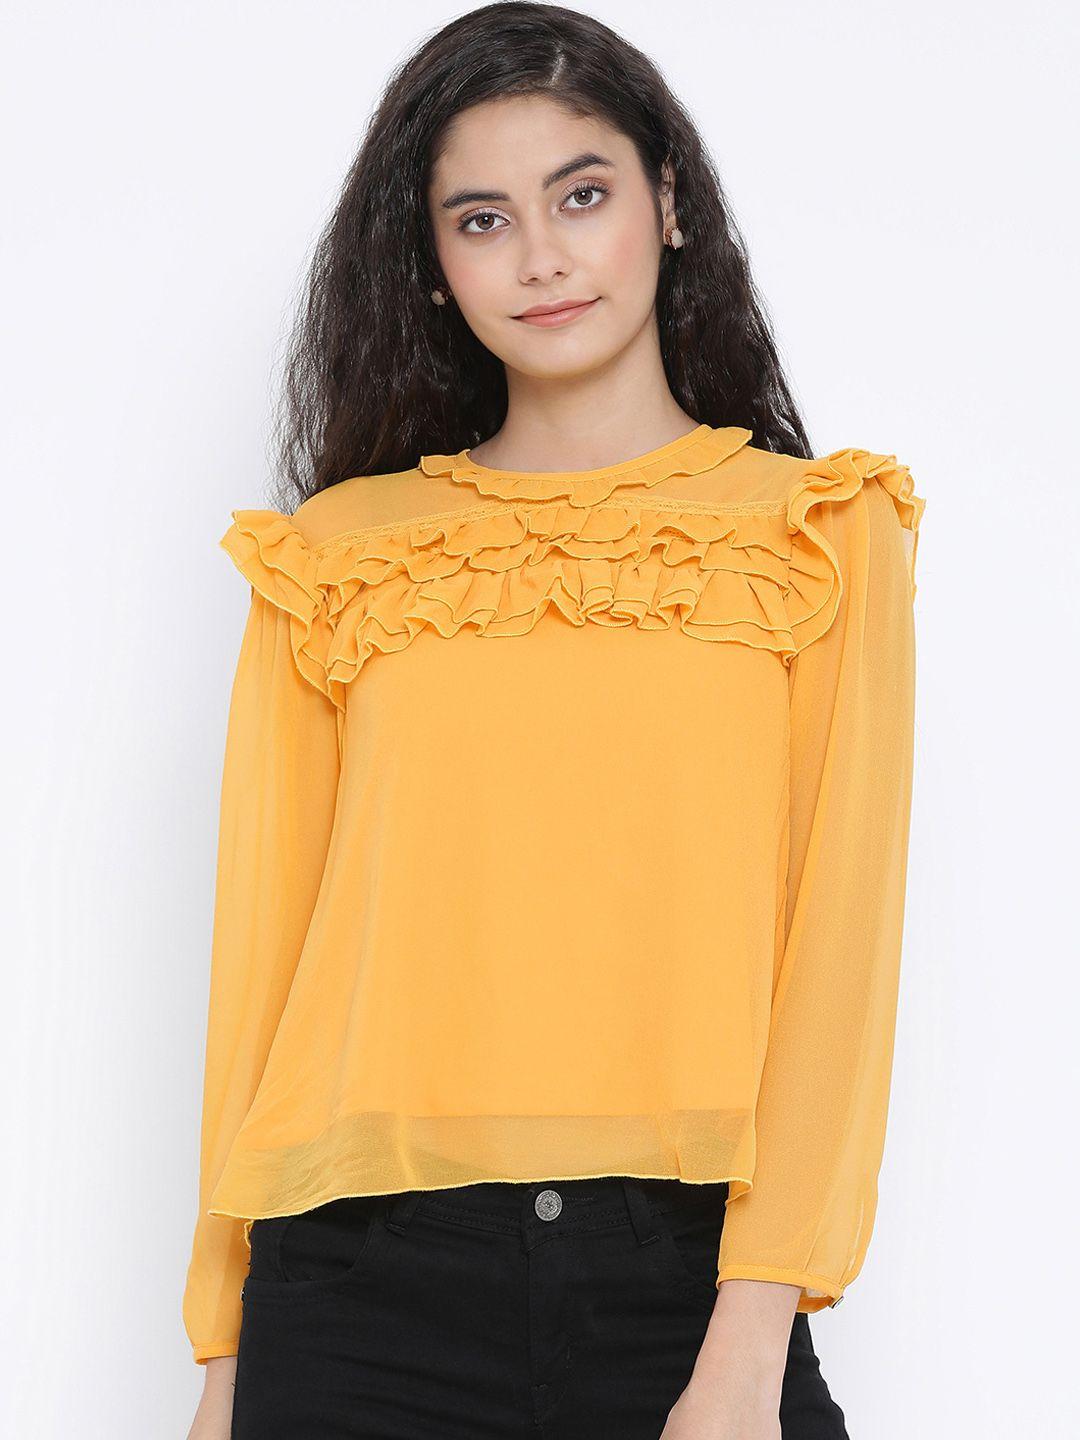 oxolloxo-women-yellow-solid-a-line-top